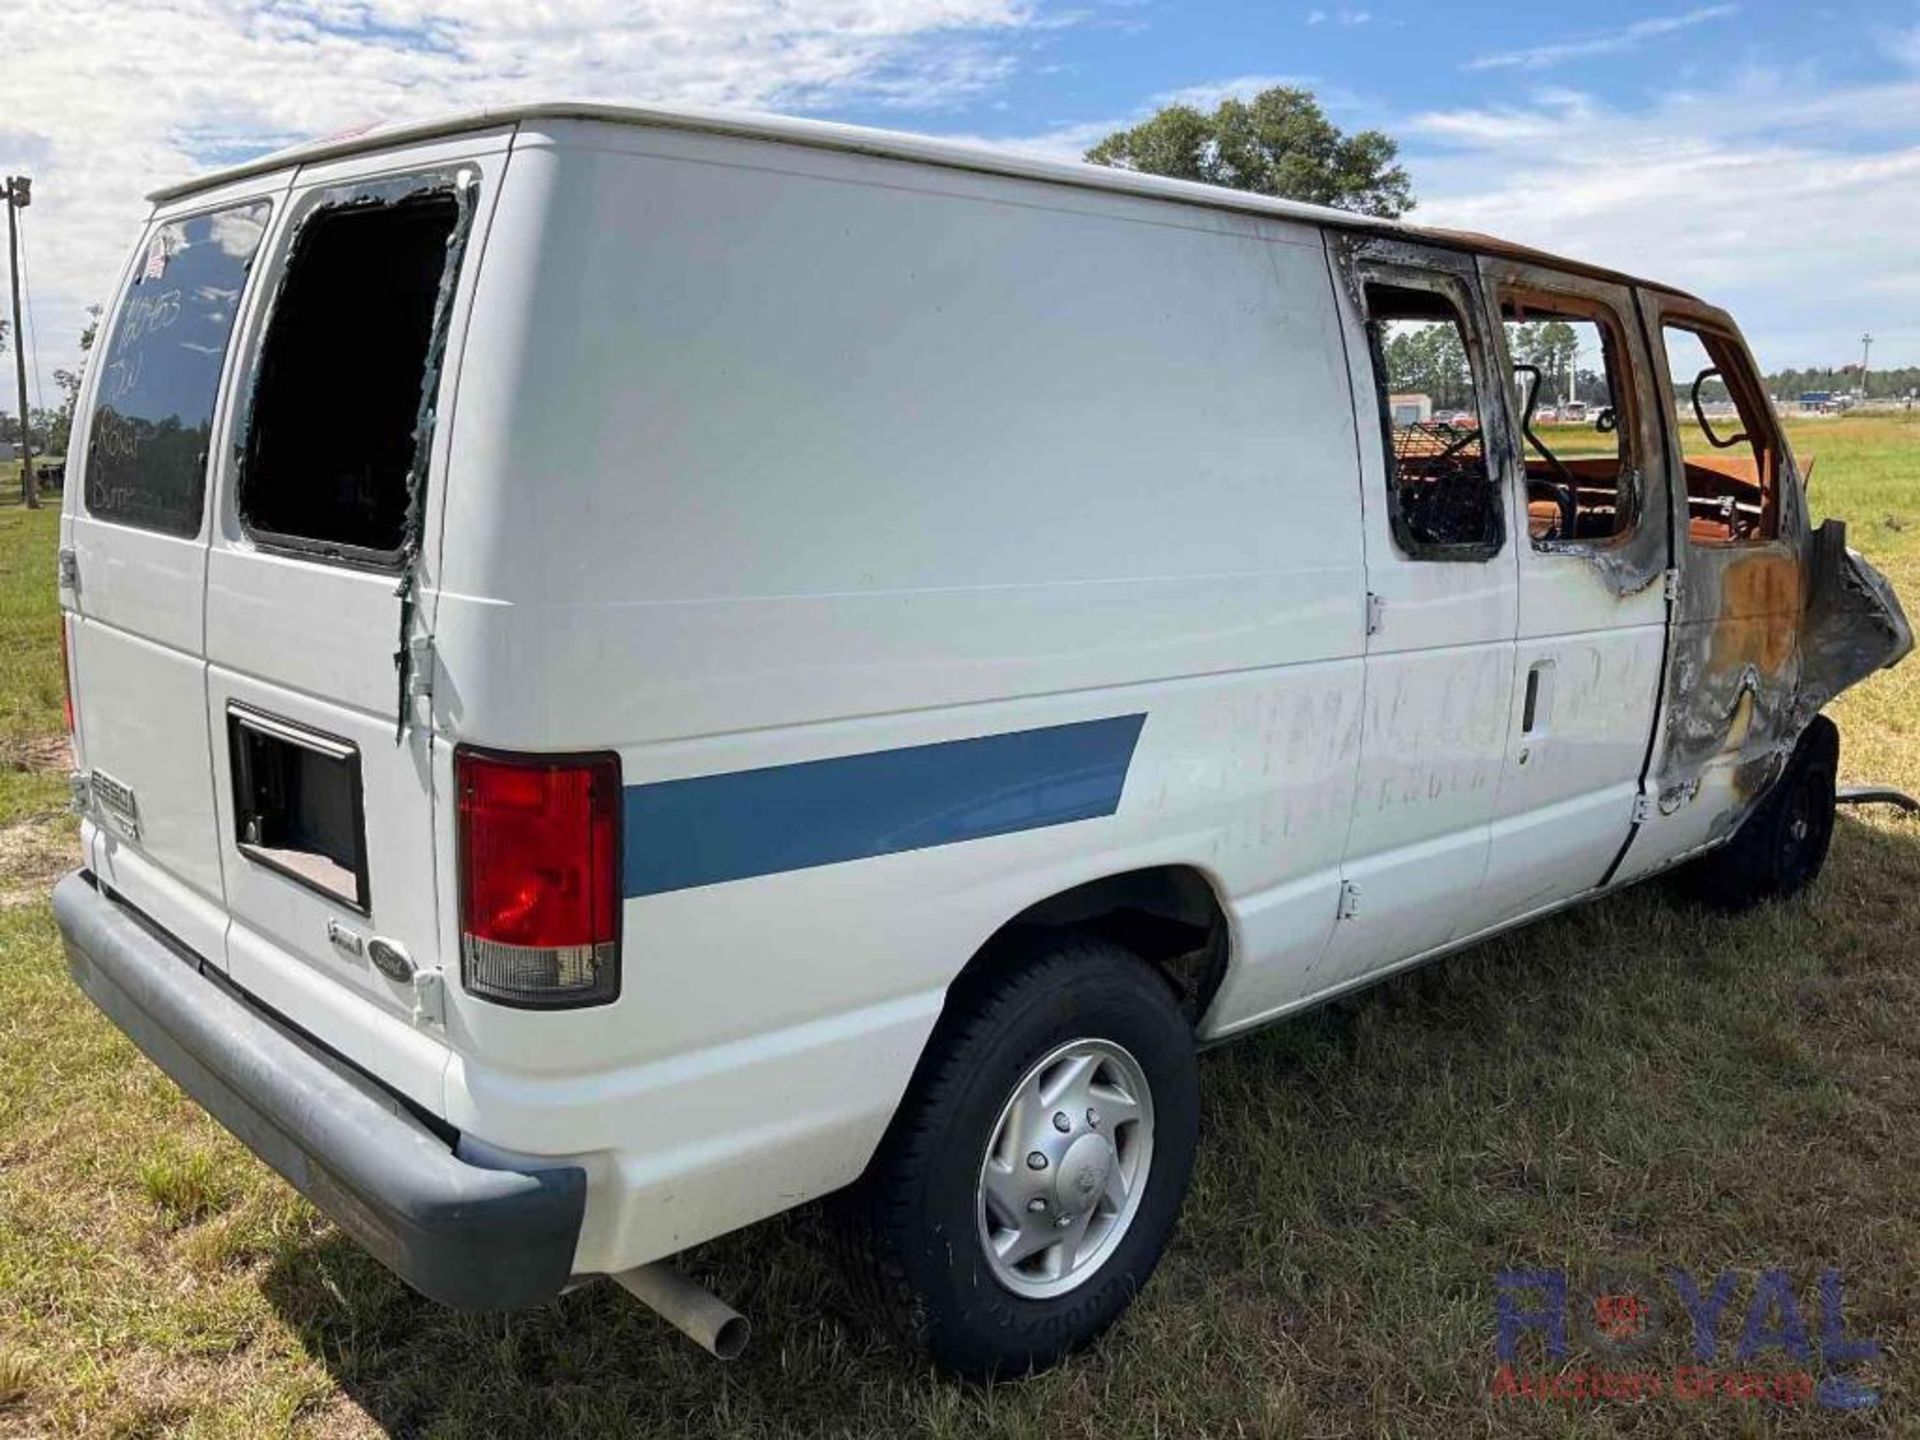 Ford E250 Cargo Van - Image 3 of 13